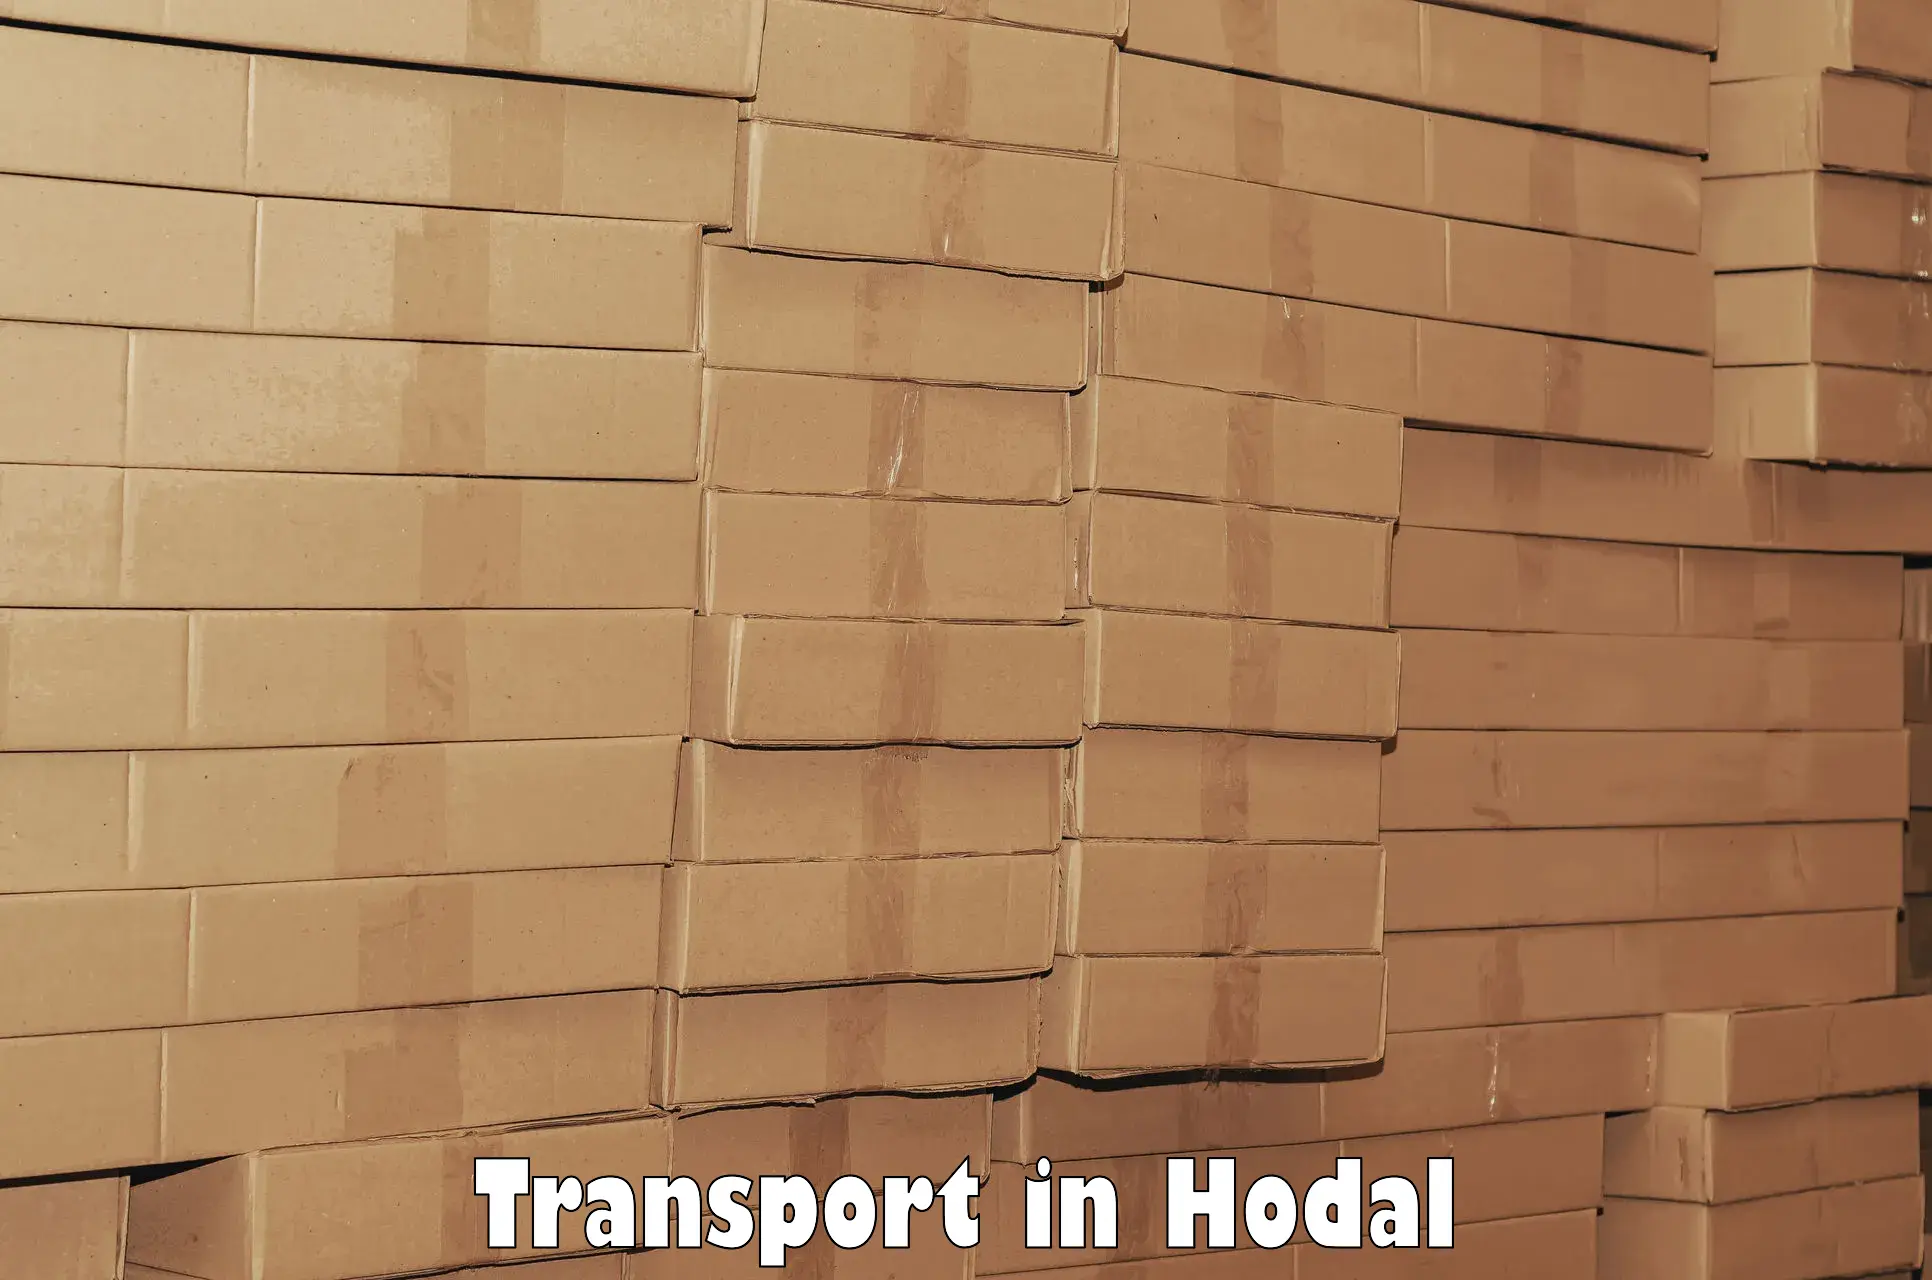 Transport bike from one state to another in Hodal